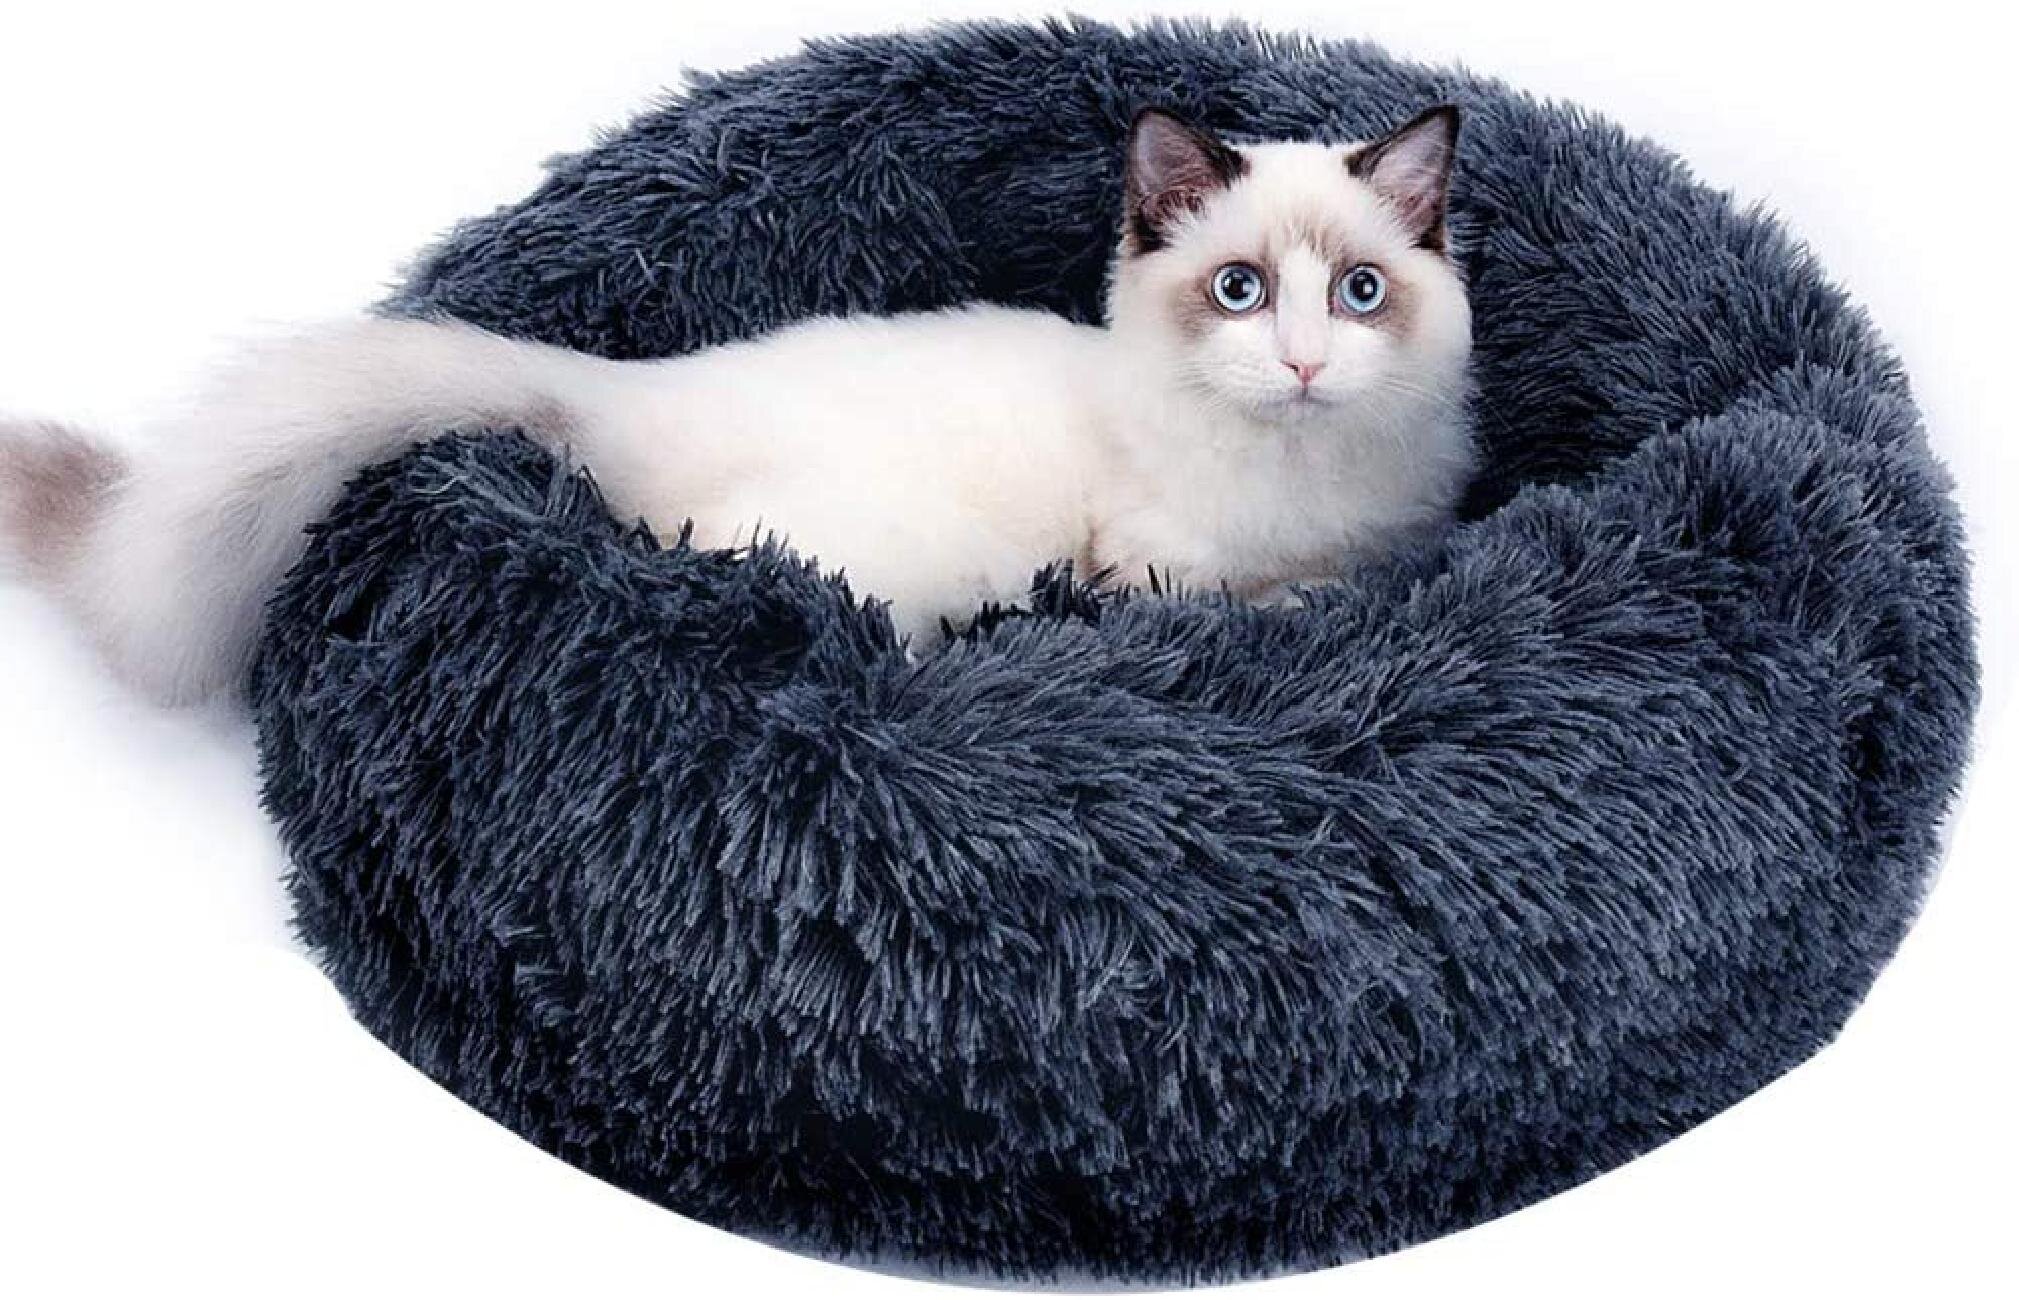 Pet Deluxe Dog Bed Super Soft Pet Sofa Cats Bed Non Slip Bottom Pet Lounger,Self Warming and Breathable Pet Bed Premium Bedding 